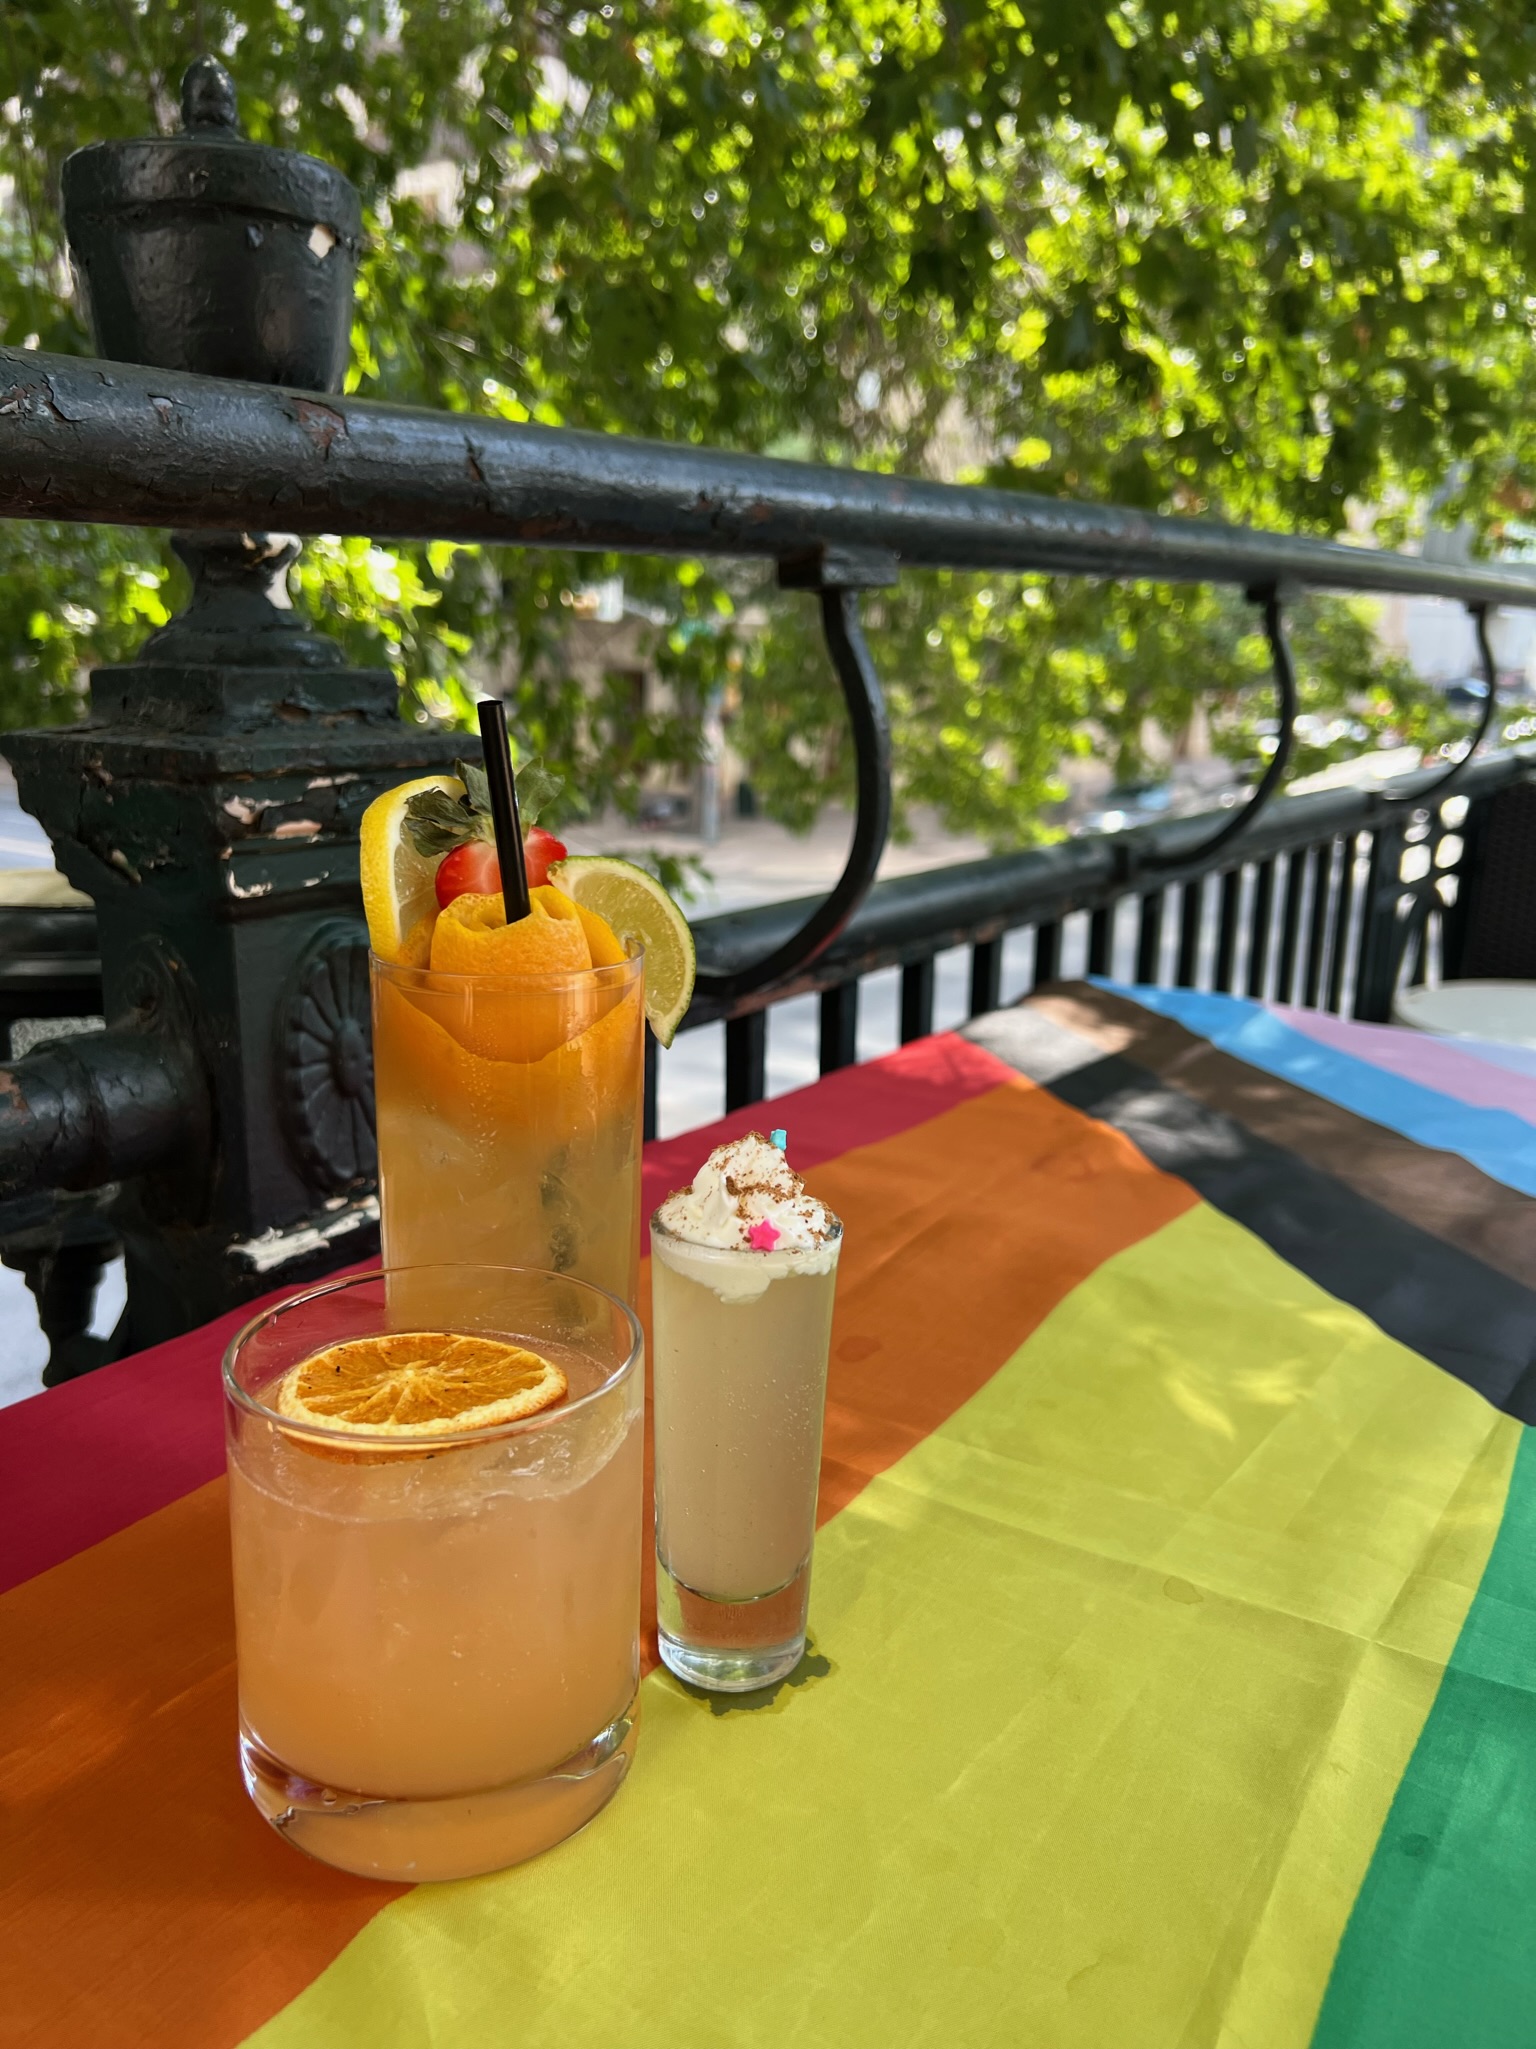 Cocktails on the Pride flag.